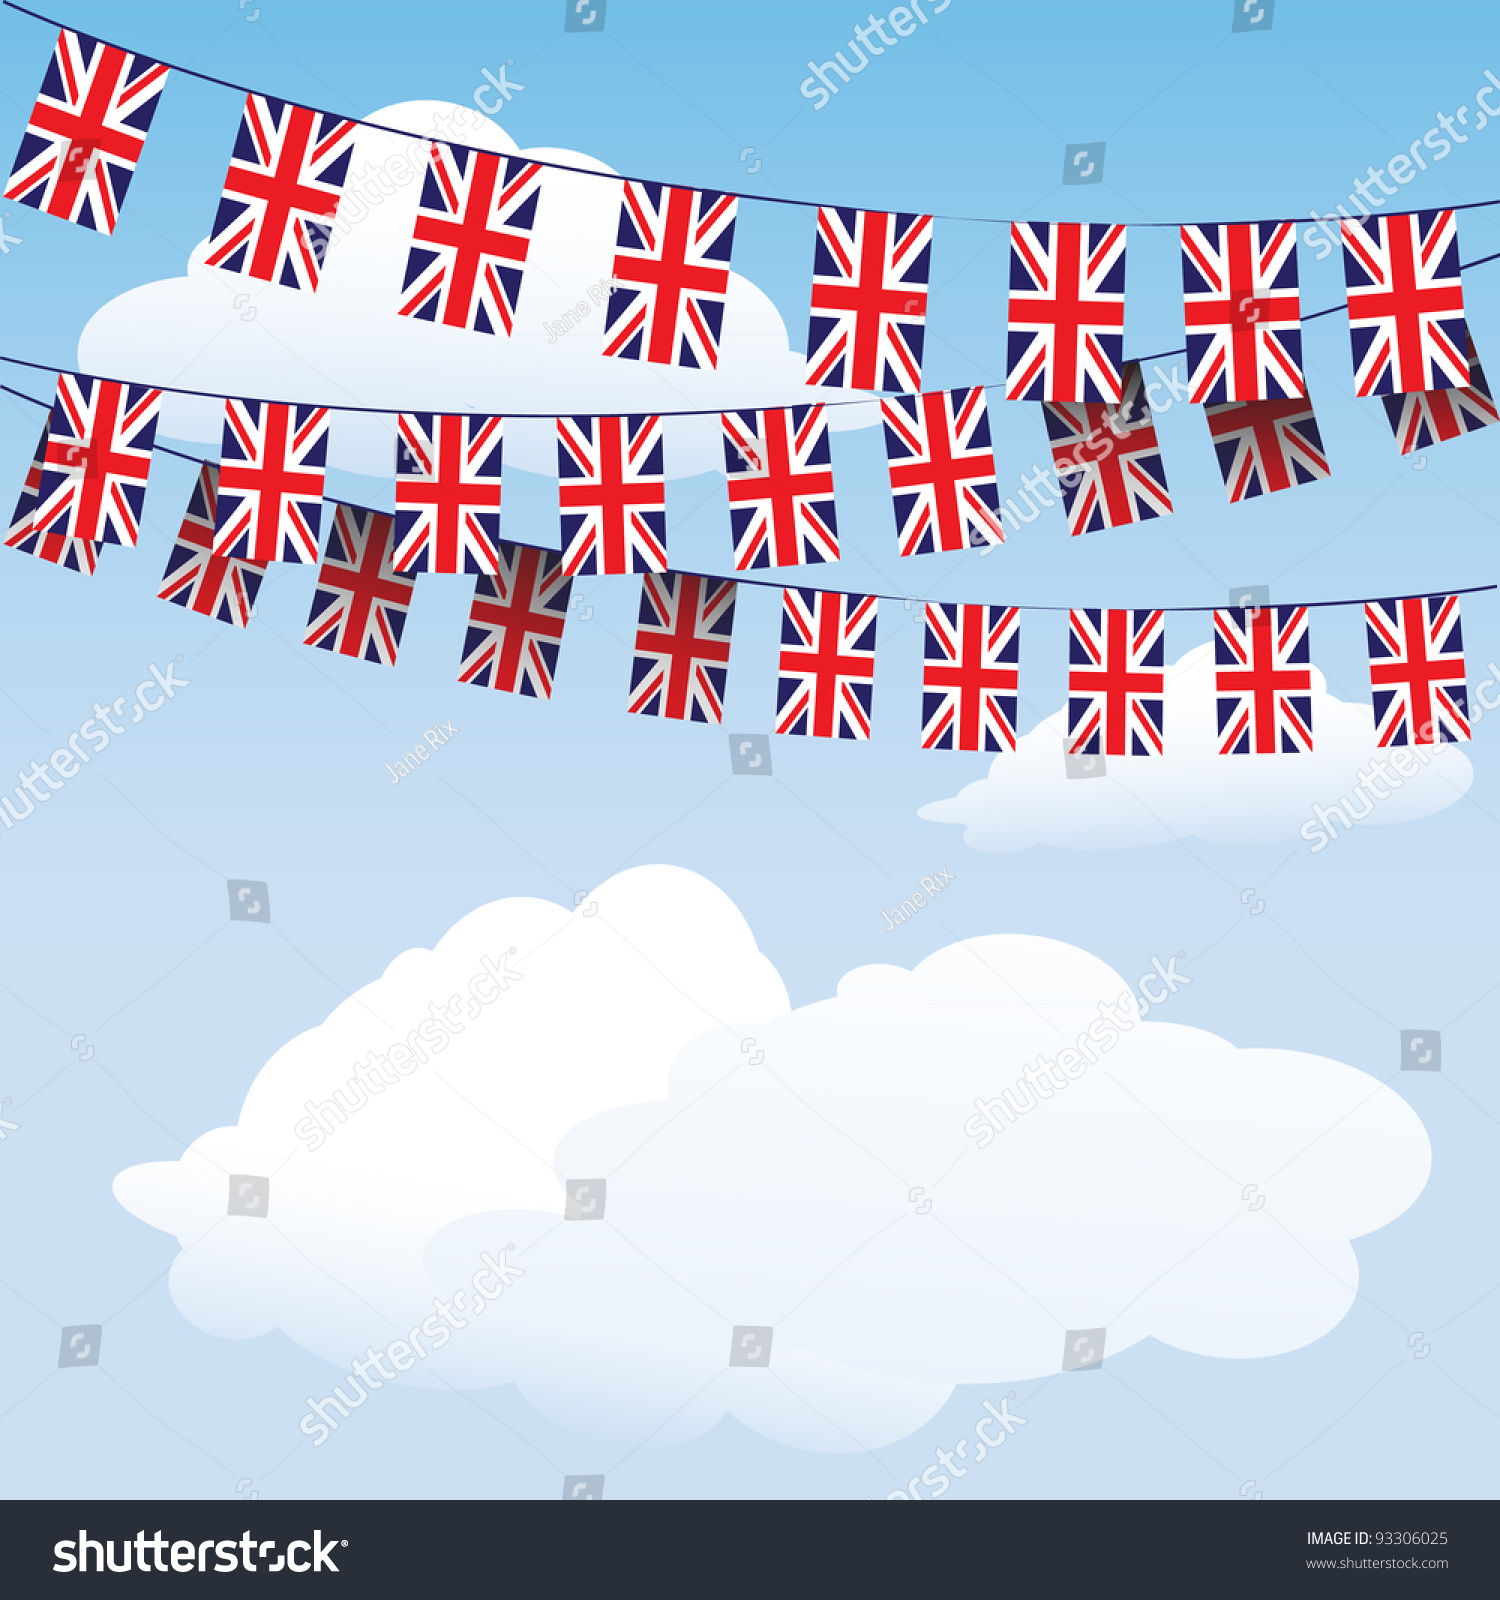 SVG of Union Jack bunting on cloud background with space for your text. Suitable for King Charles III coronation celebrations.  EPS10 vector format svg